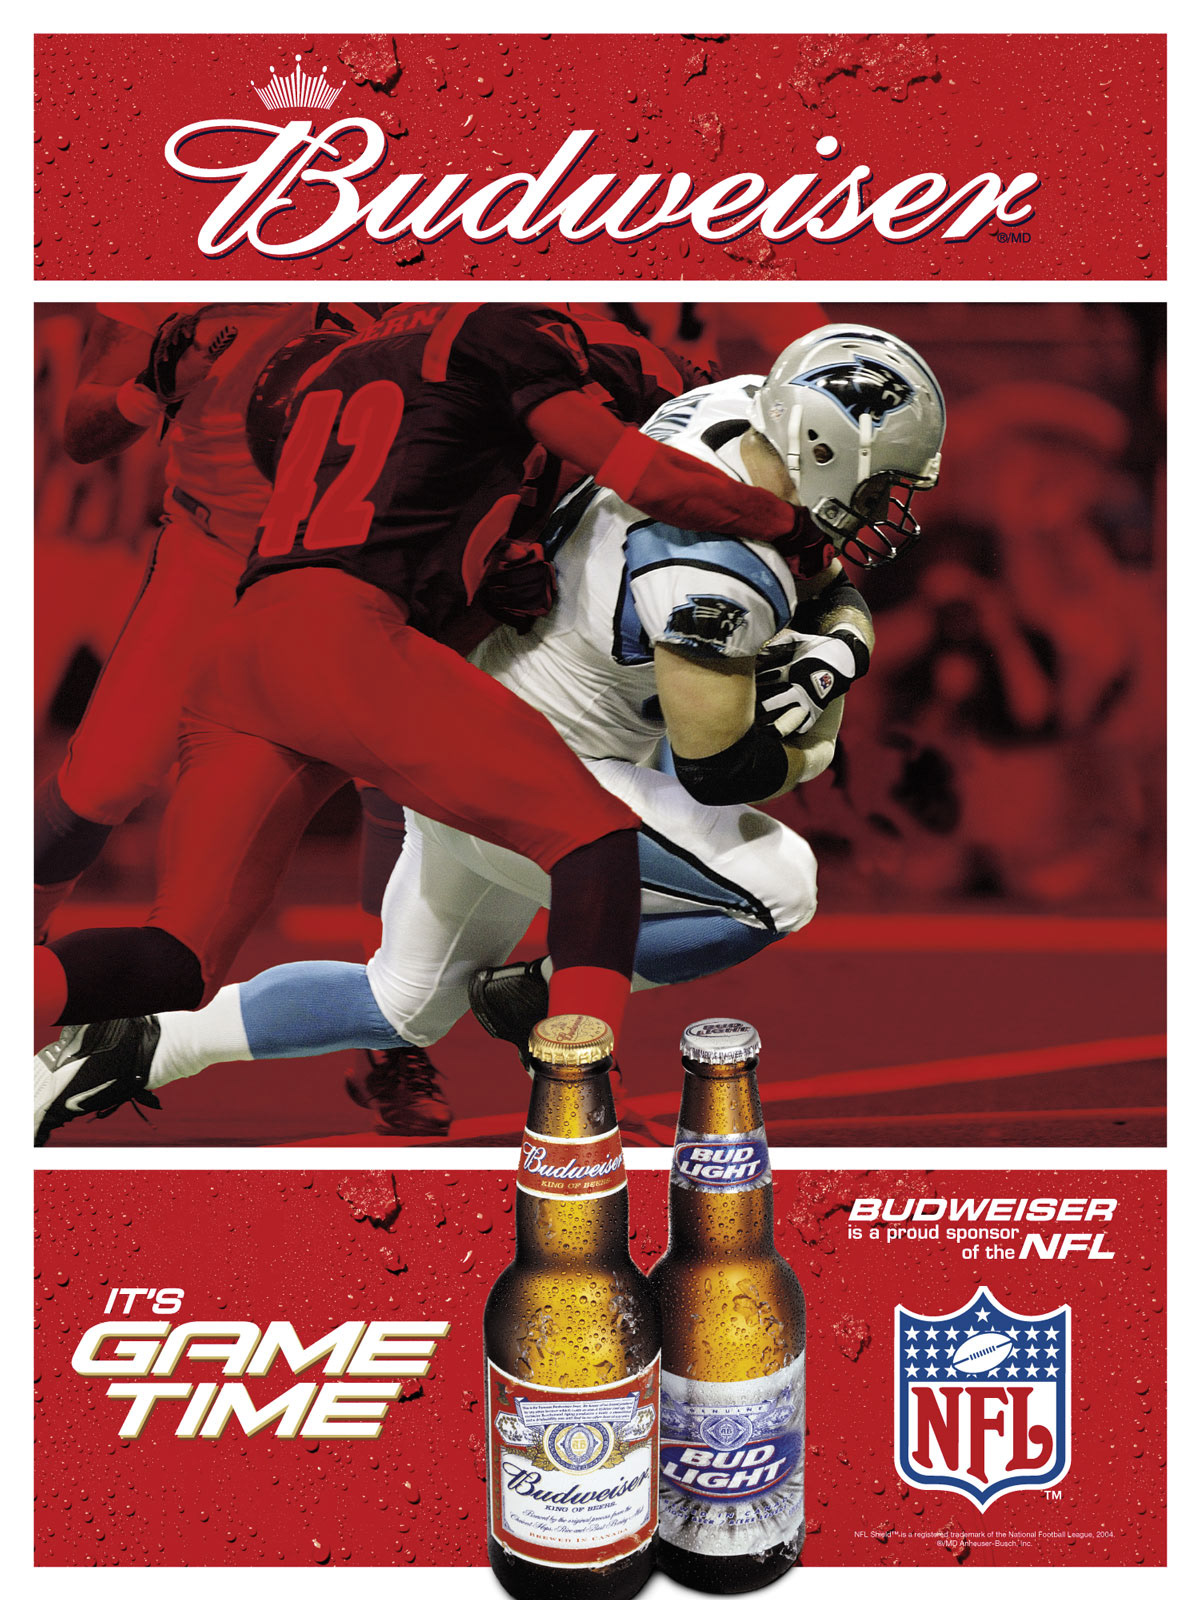 Basic promotional poster for Budweiser and Bud Light NFL "Game Time&qu...